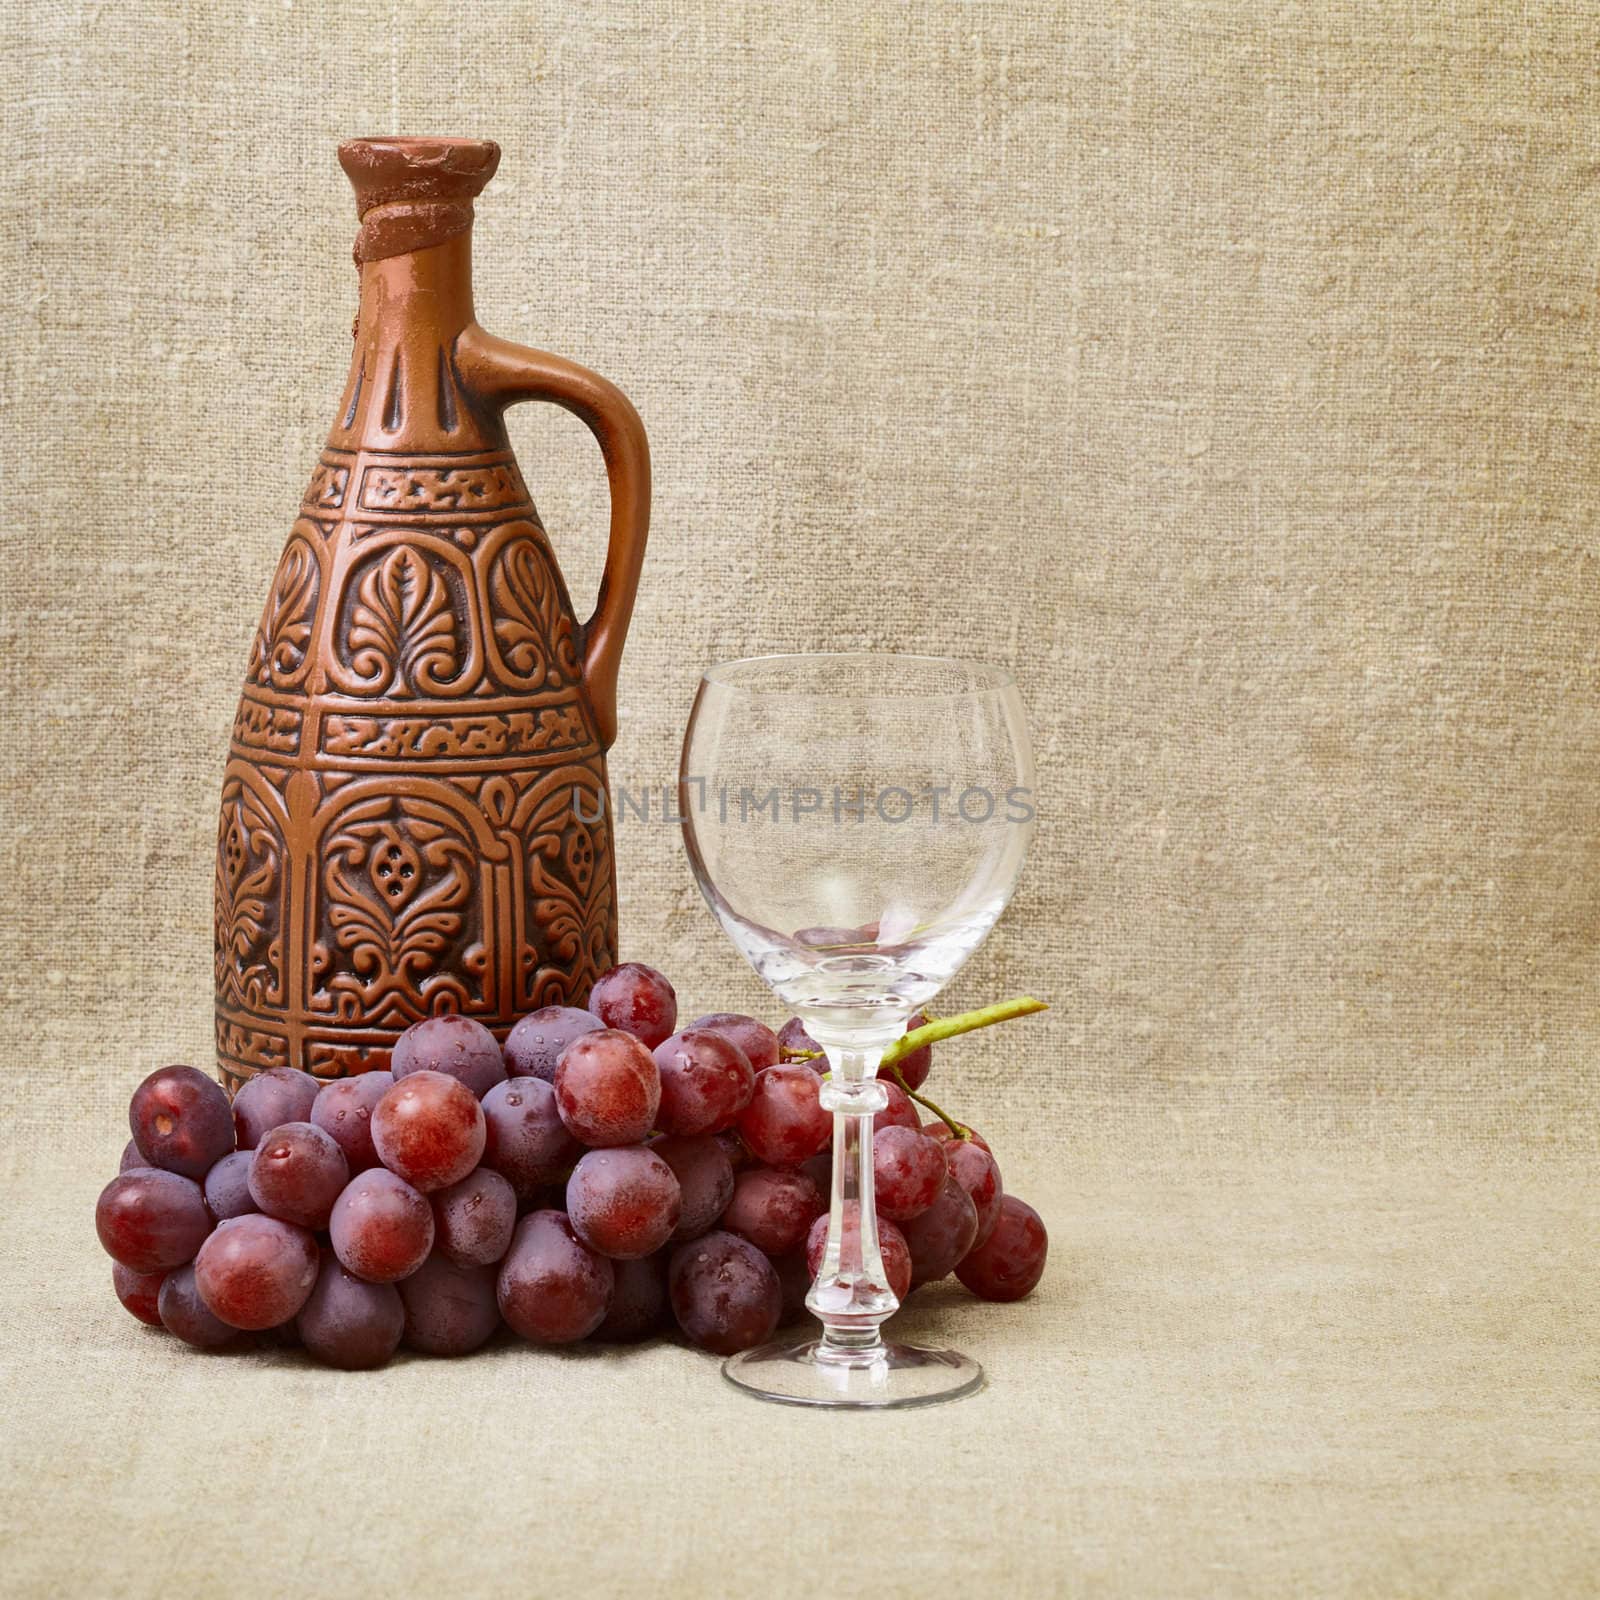 Still-life - clay bottle, grapes and a glass on the background of canvas